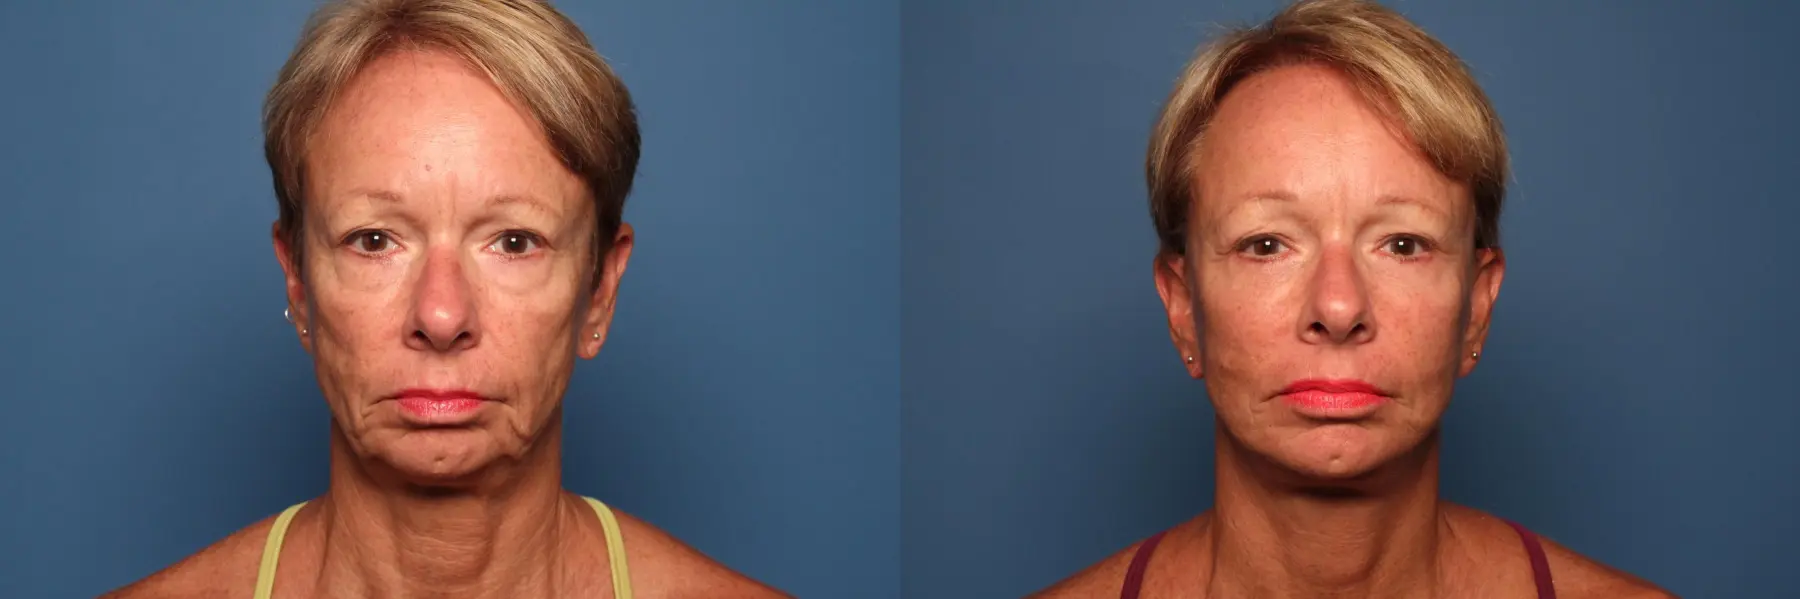 Mini Facelift: Patient 4 - Before and After 1